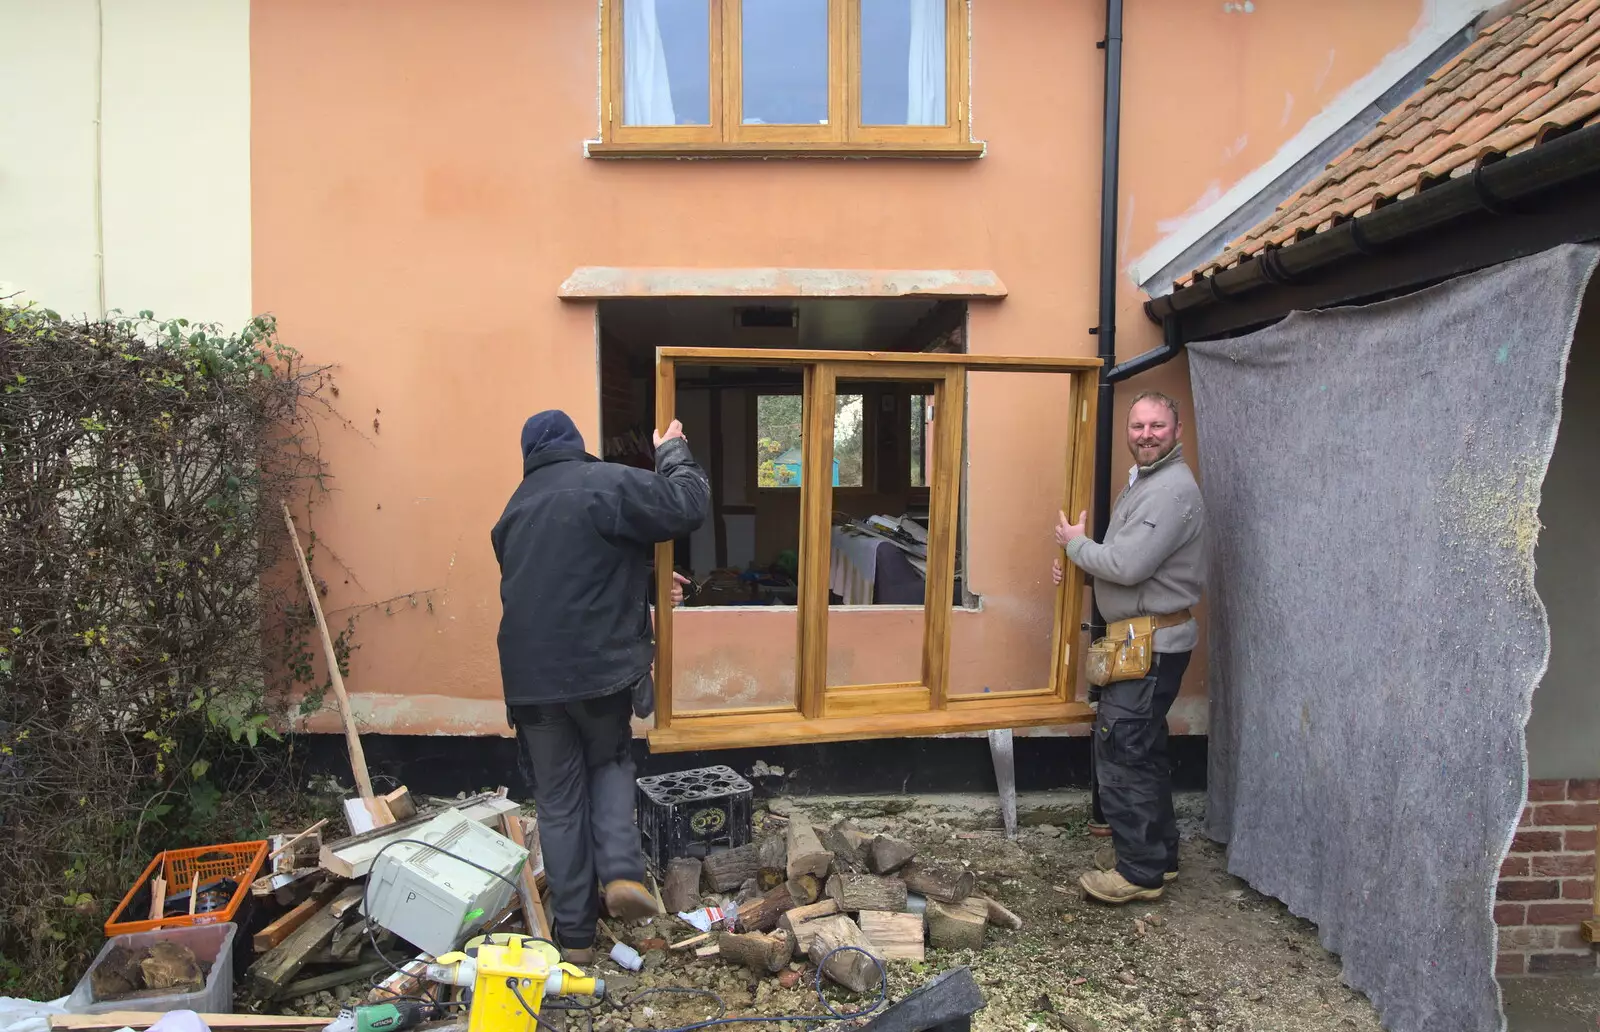 The new window frame goes in, from Jack's Birthday and New Windows, Brome and Brockdish, Norfolk - 4th December 2016